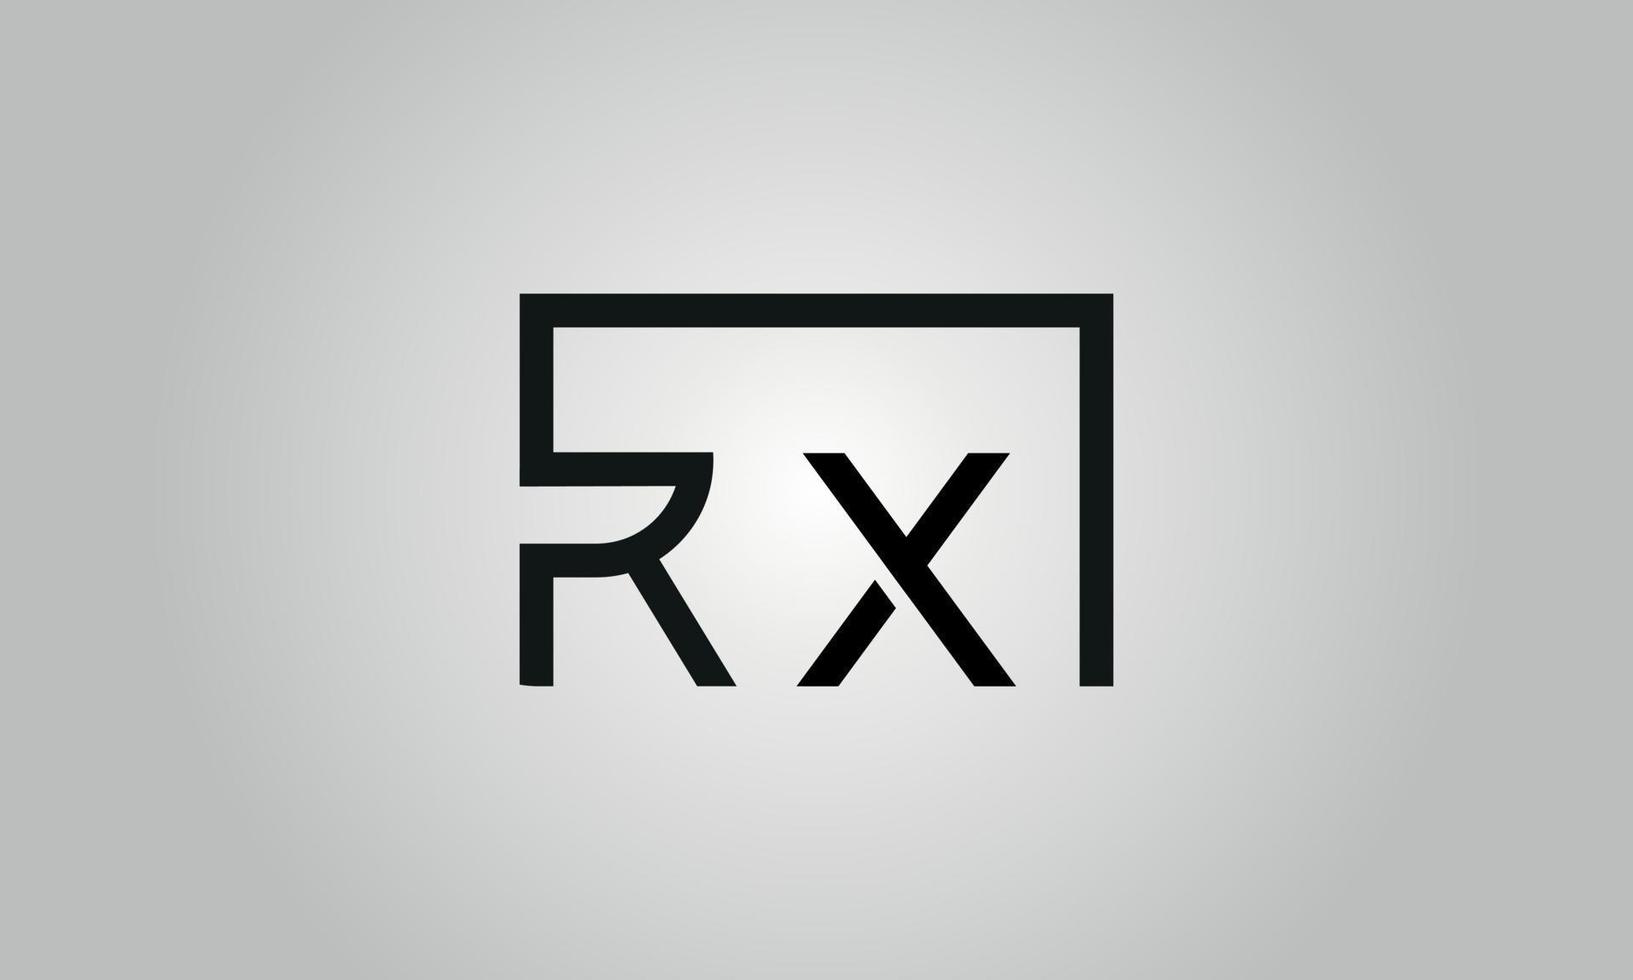 https://static.vecteezy.com/system/resources/previews/011/225/041/non_2x/letter-rx-logo-design-rx-logo-with-square-shape-in-black-colors-free-template-free-vector.jpg